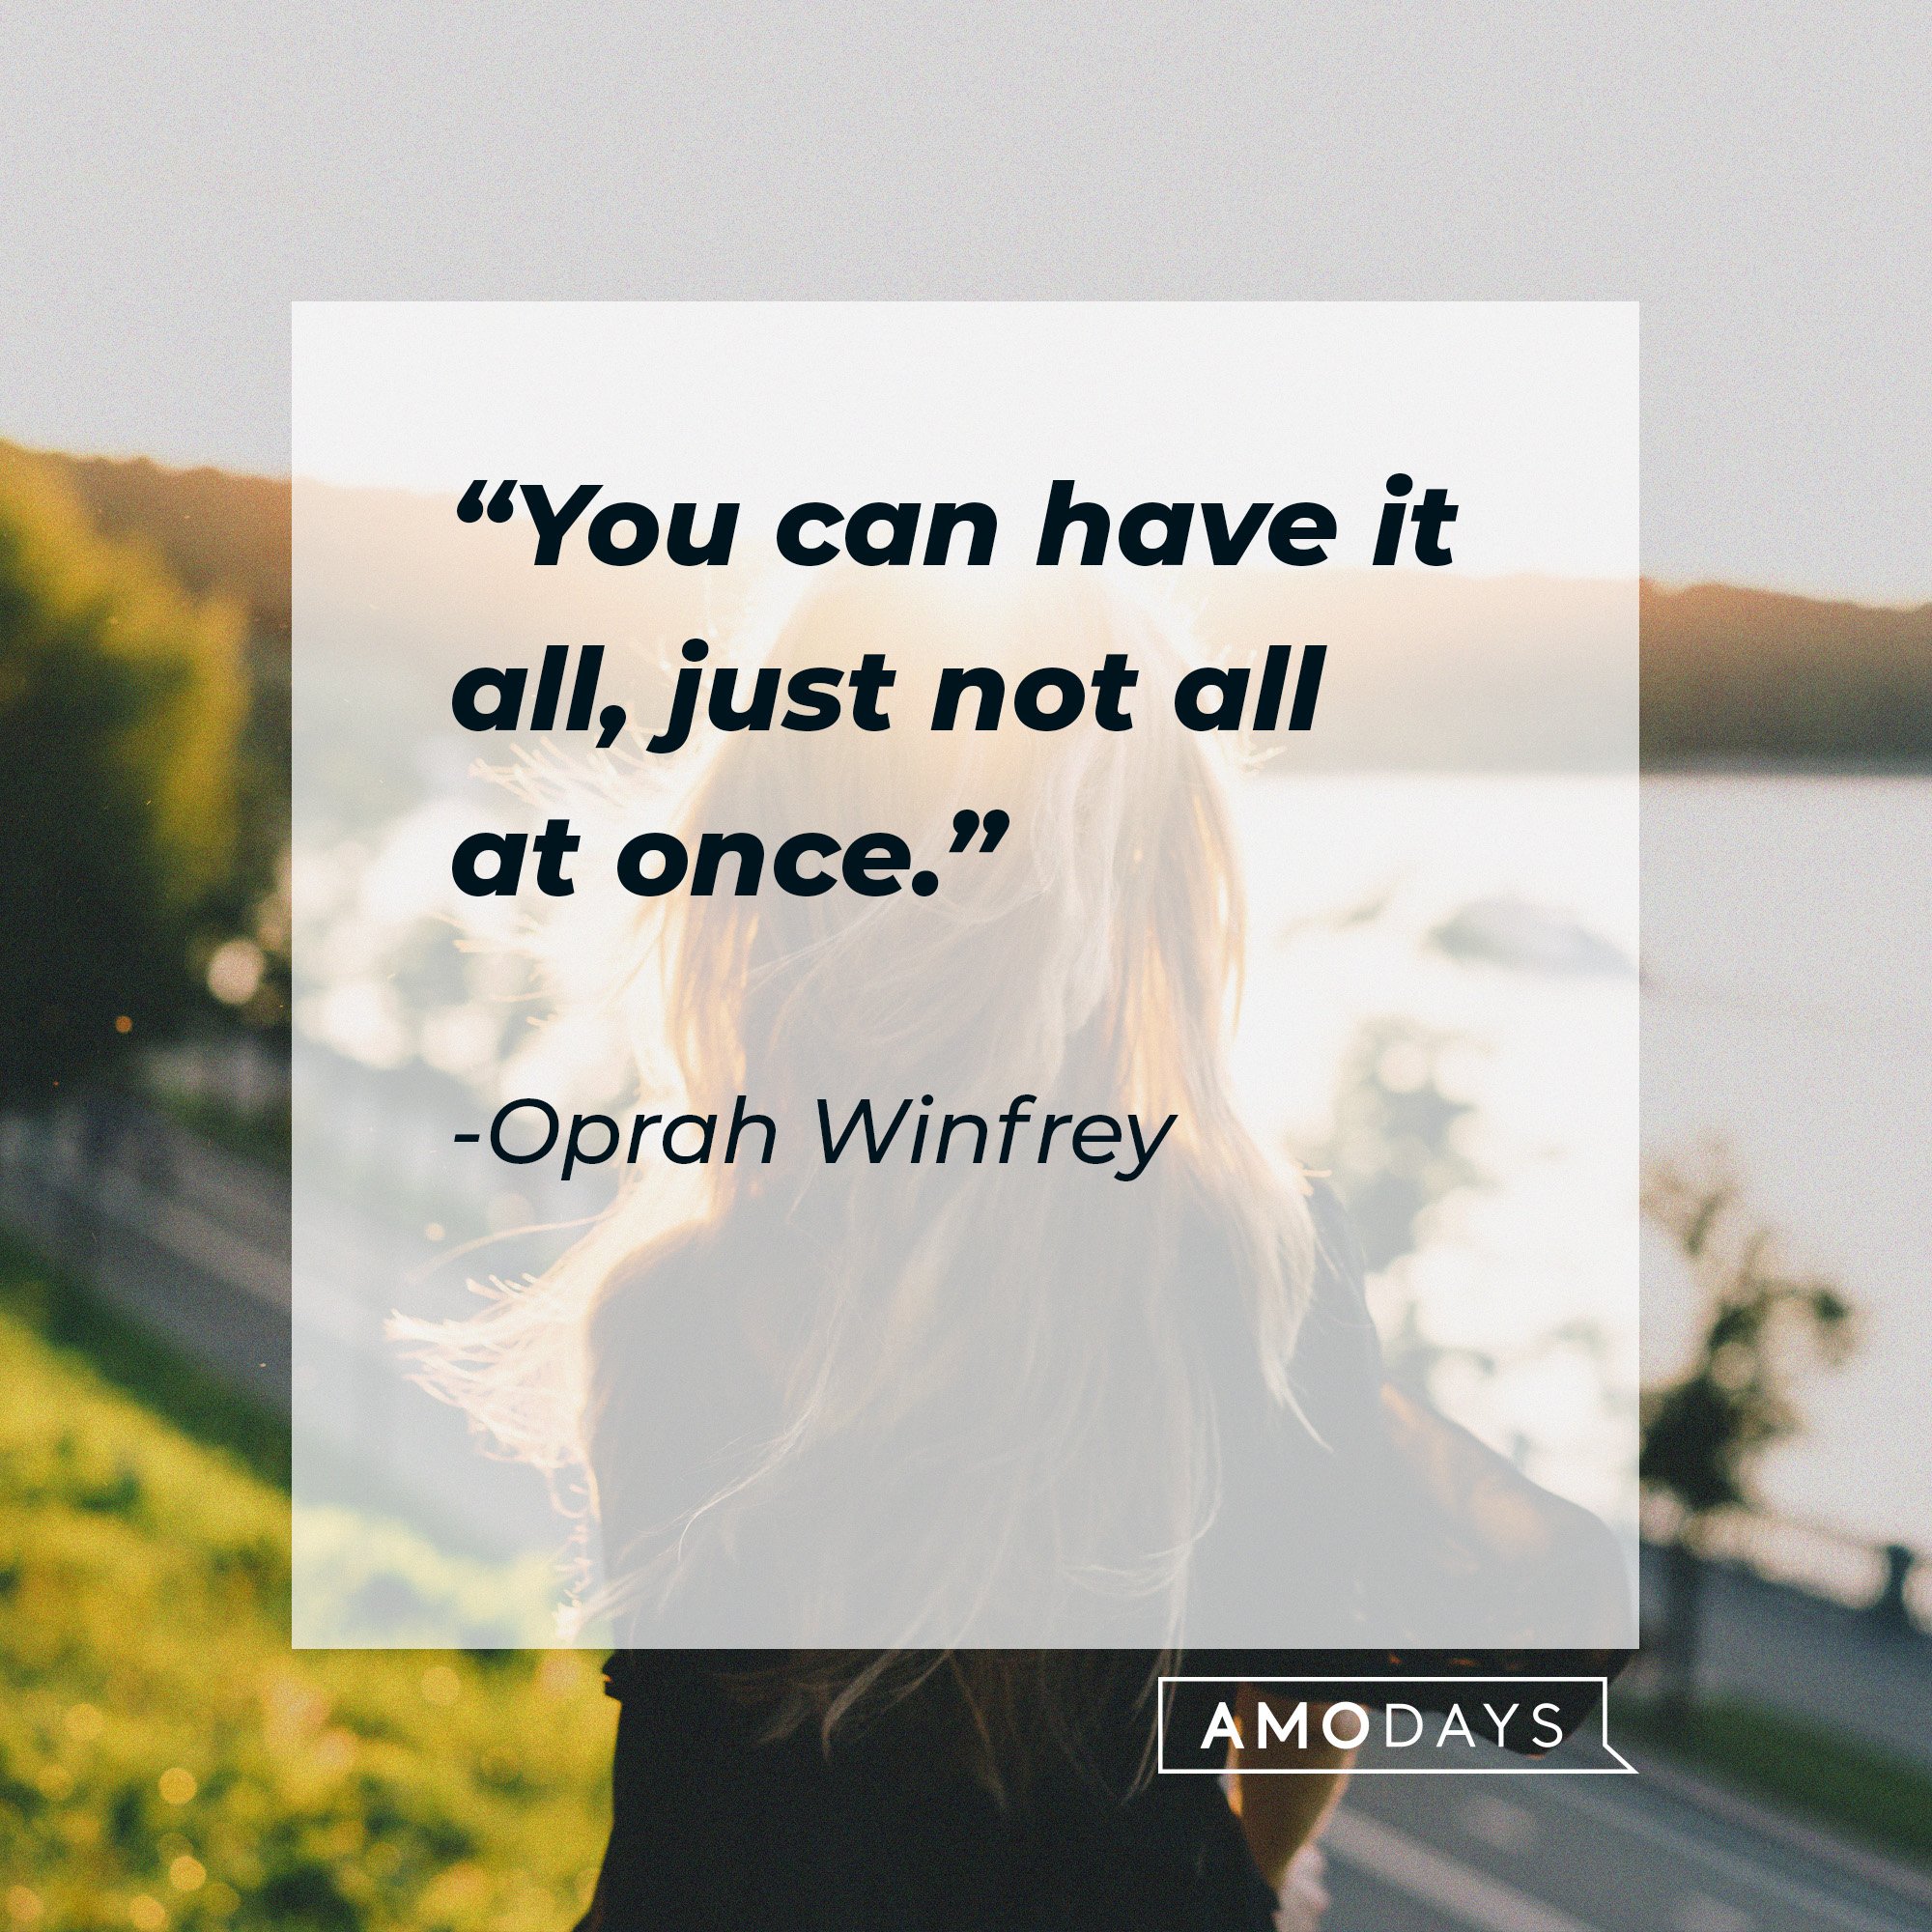 Oprah Winfrey's quote: “You can have it all, just not all at once.” | Image: AmoDays